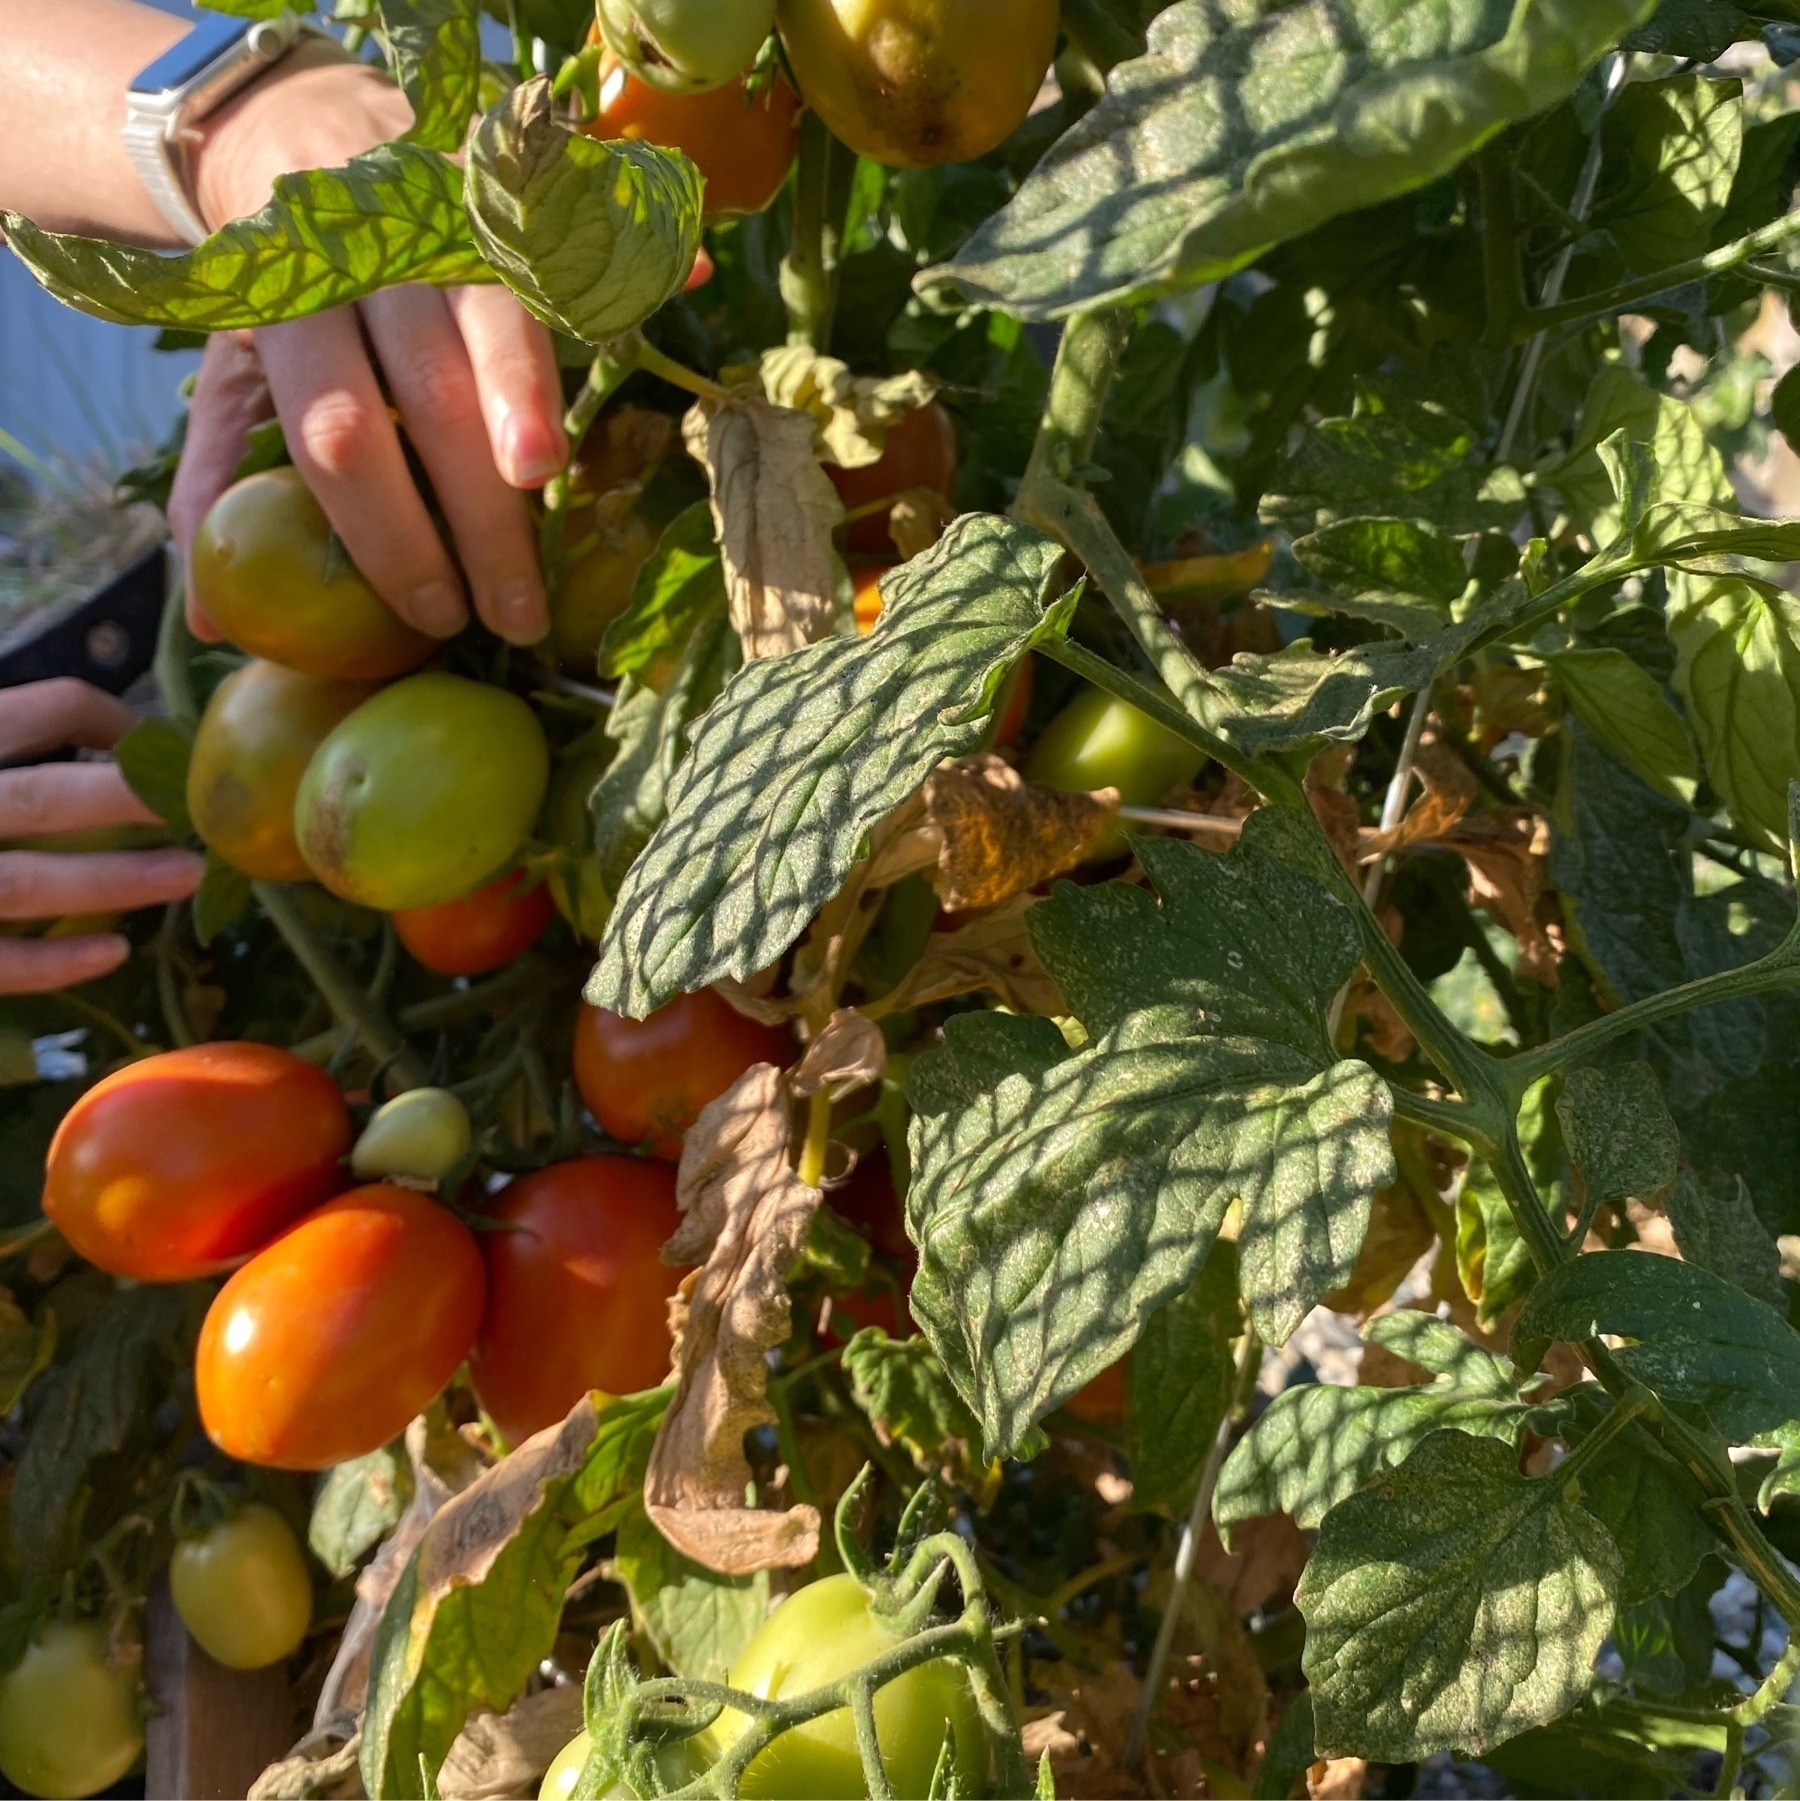 ripening tomatoes on a plant with human hand for scale